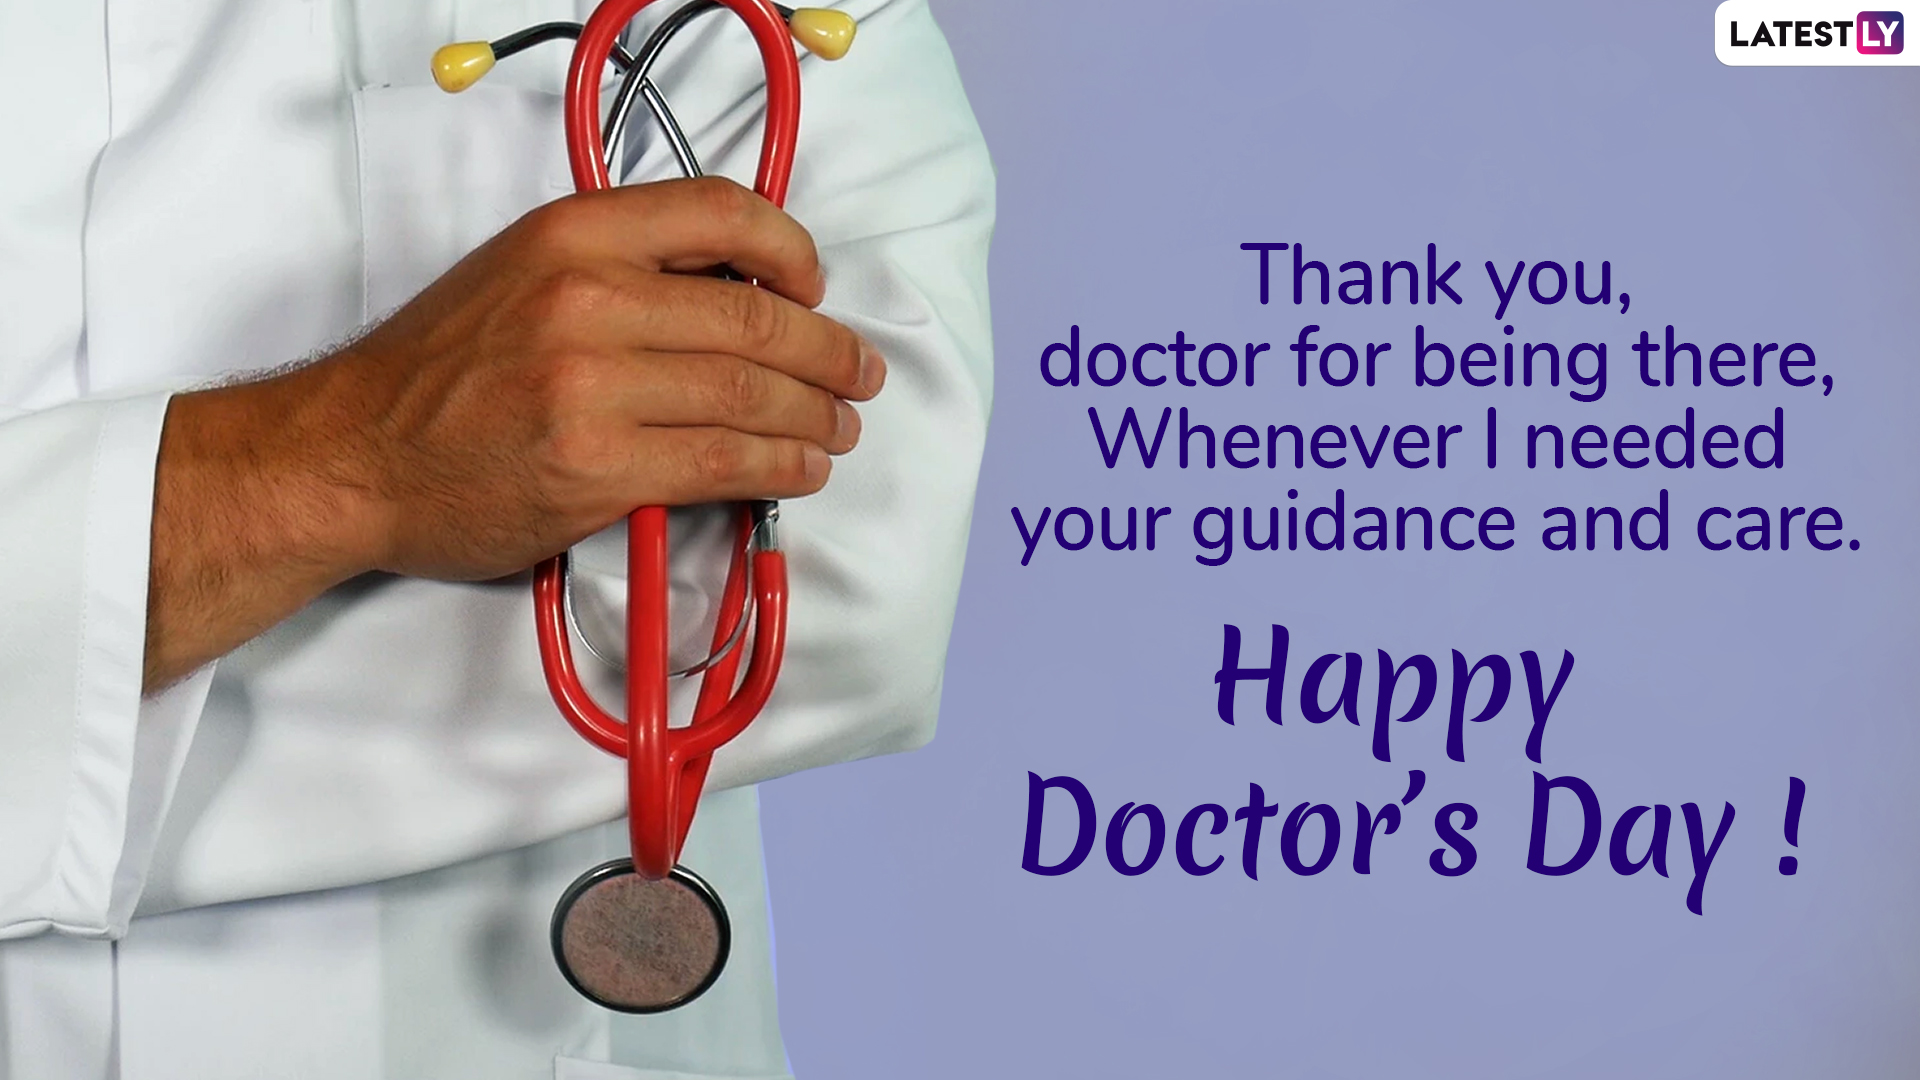 Doctor’s Day Images, Quotes and Greeting Cards for Free Download Online